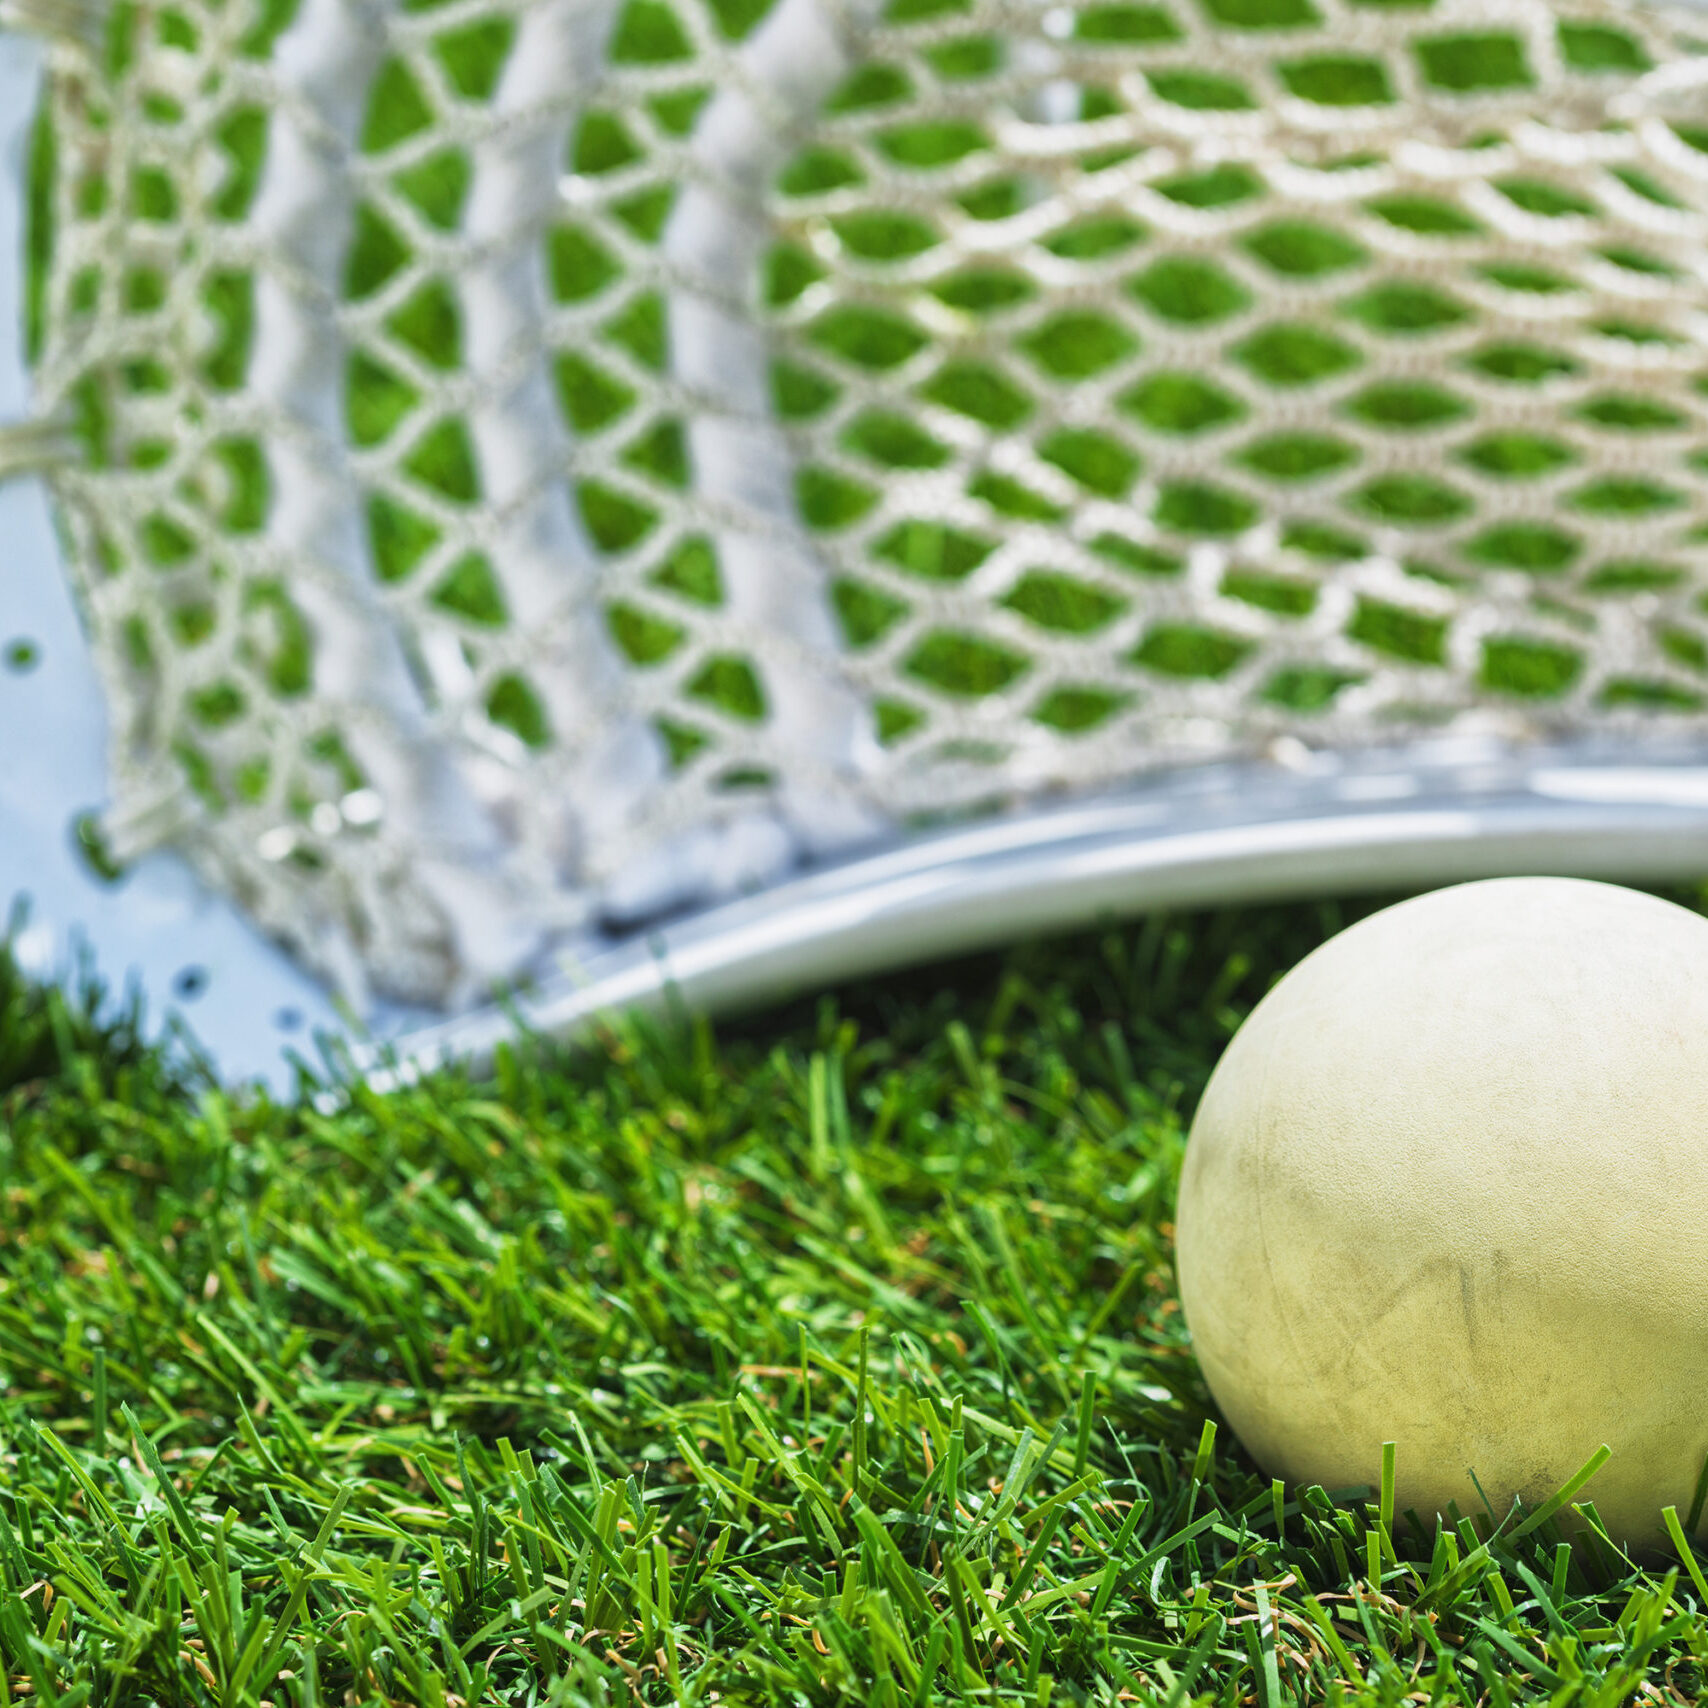 Low angle view of a white Lacross ball sitting in front of a Lacrosse stick with white shooting string on artificial turf in the mid day sun